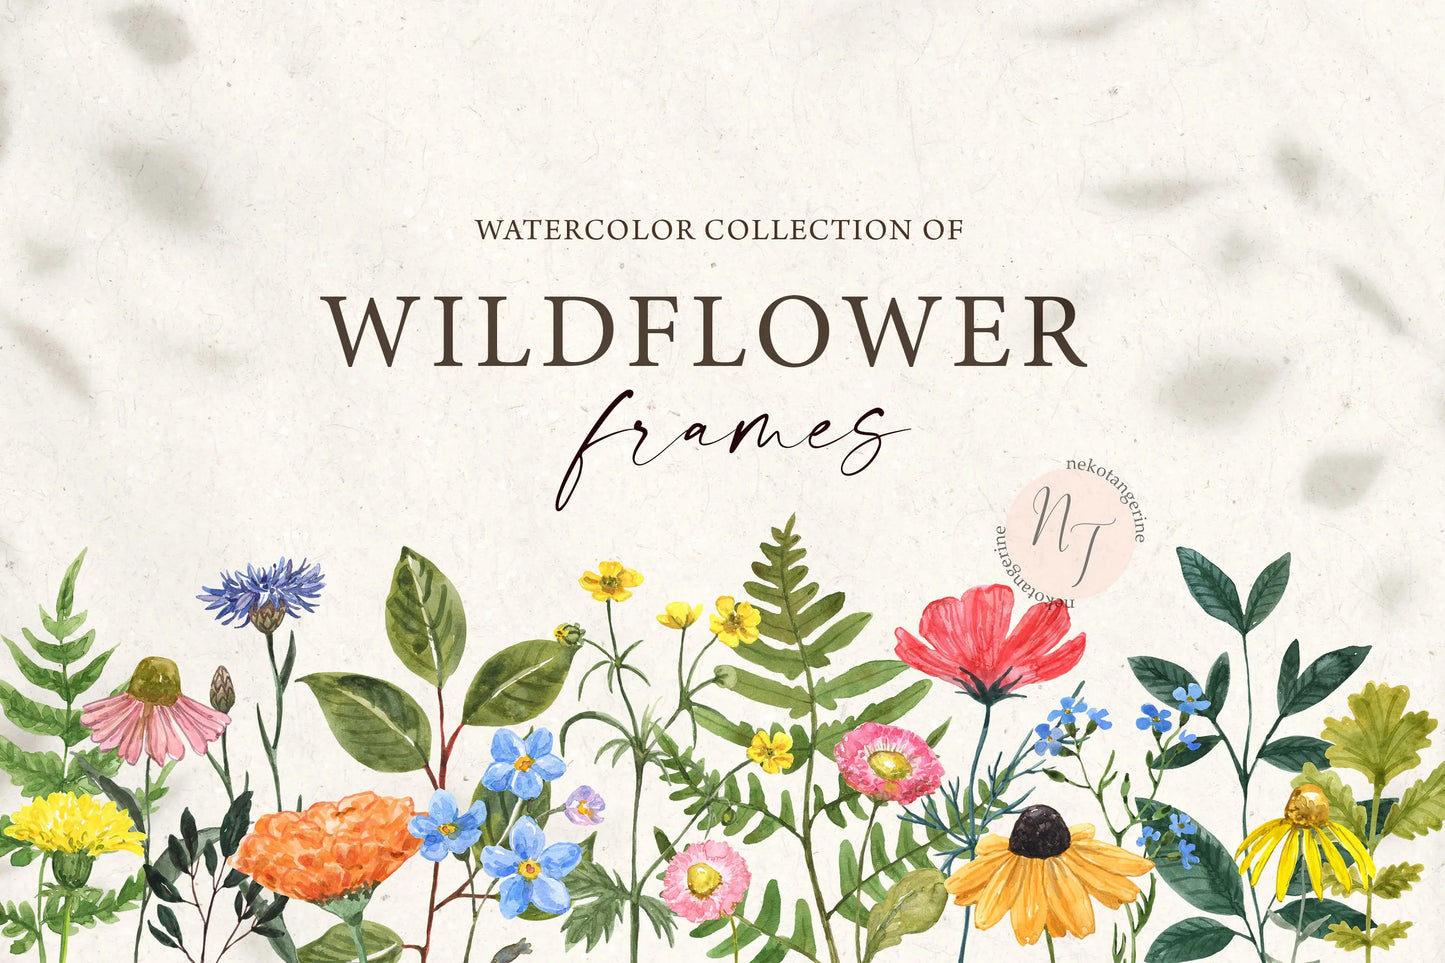 Watercolor Meadow Wildflower Frames and Borders clipart, watercolor wildflower clipart PNG